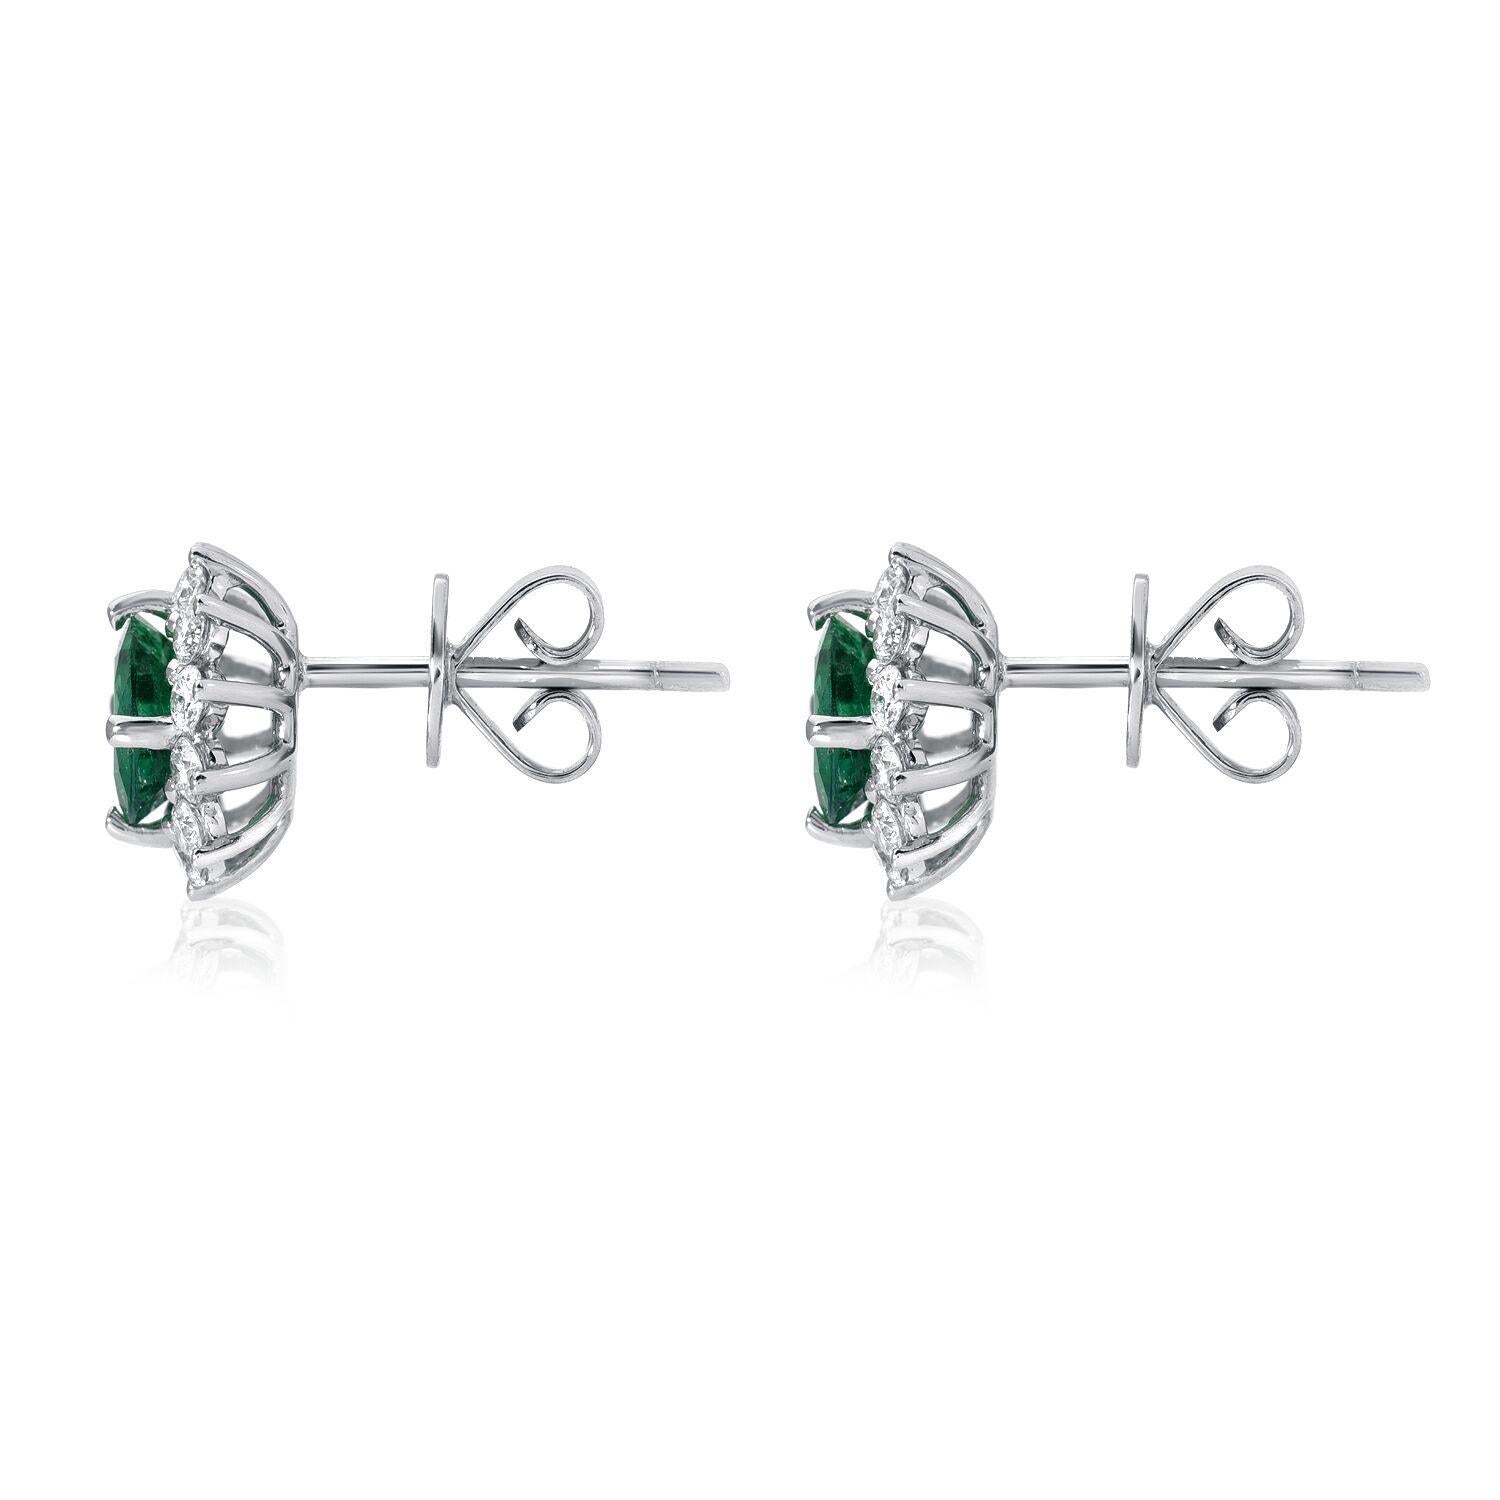 Round Cut Emerald Stud Earrings Rounds 1.29 Carats